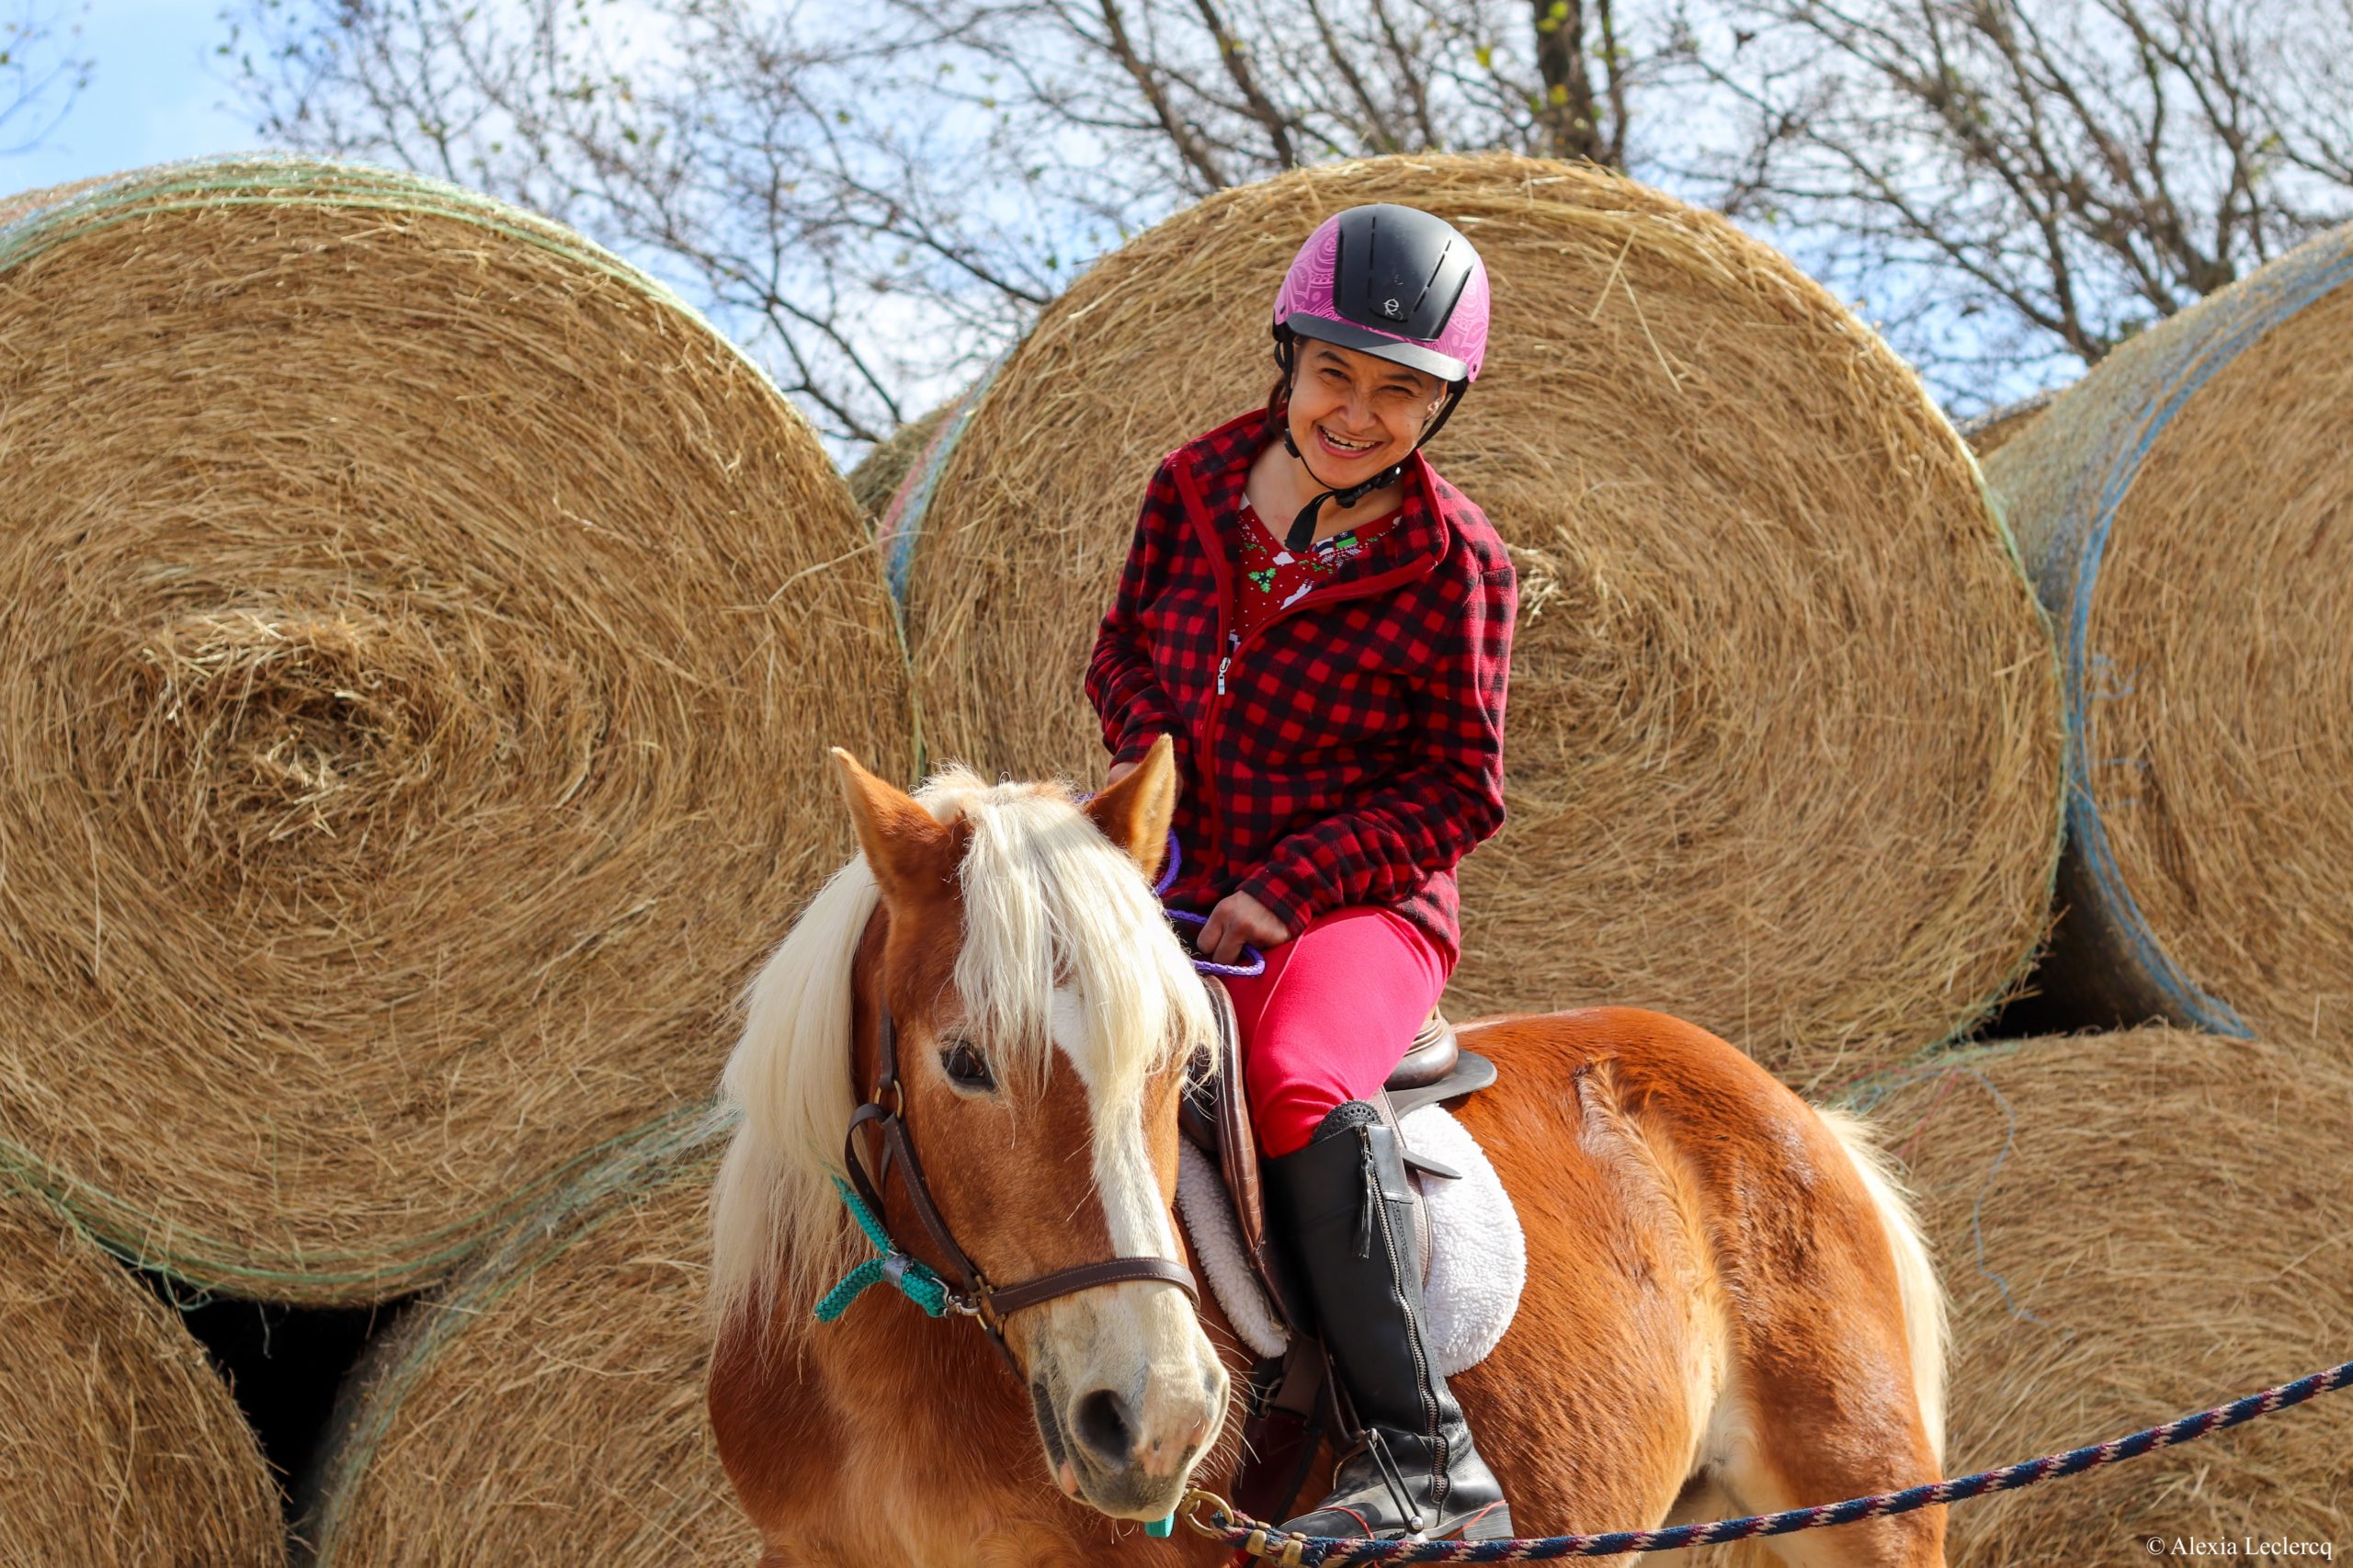 Student and horse, Story, in front of the hay bales.